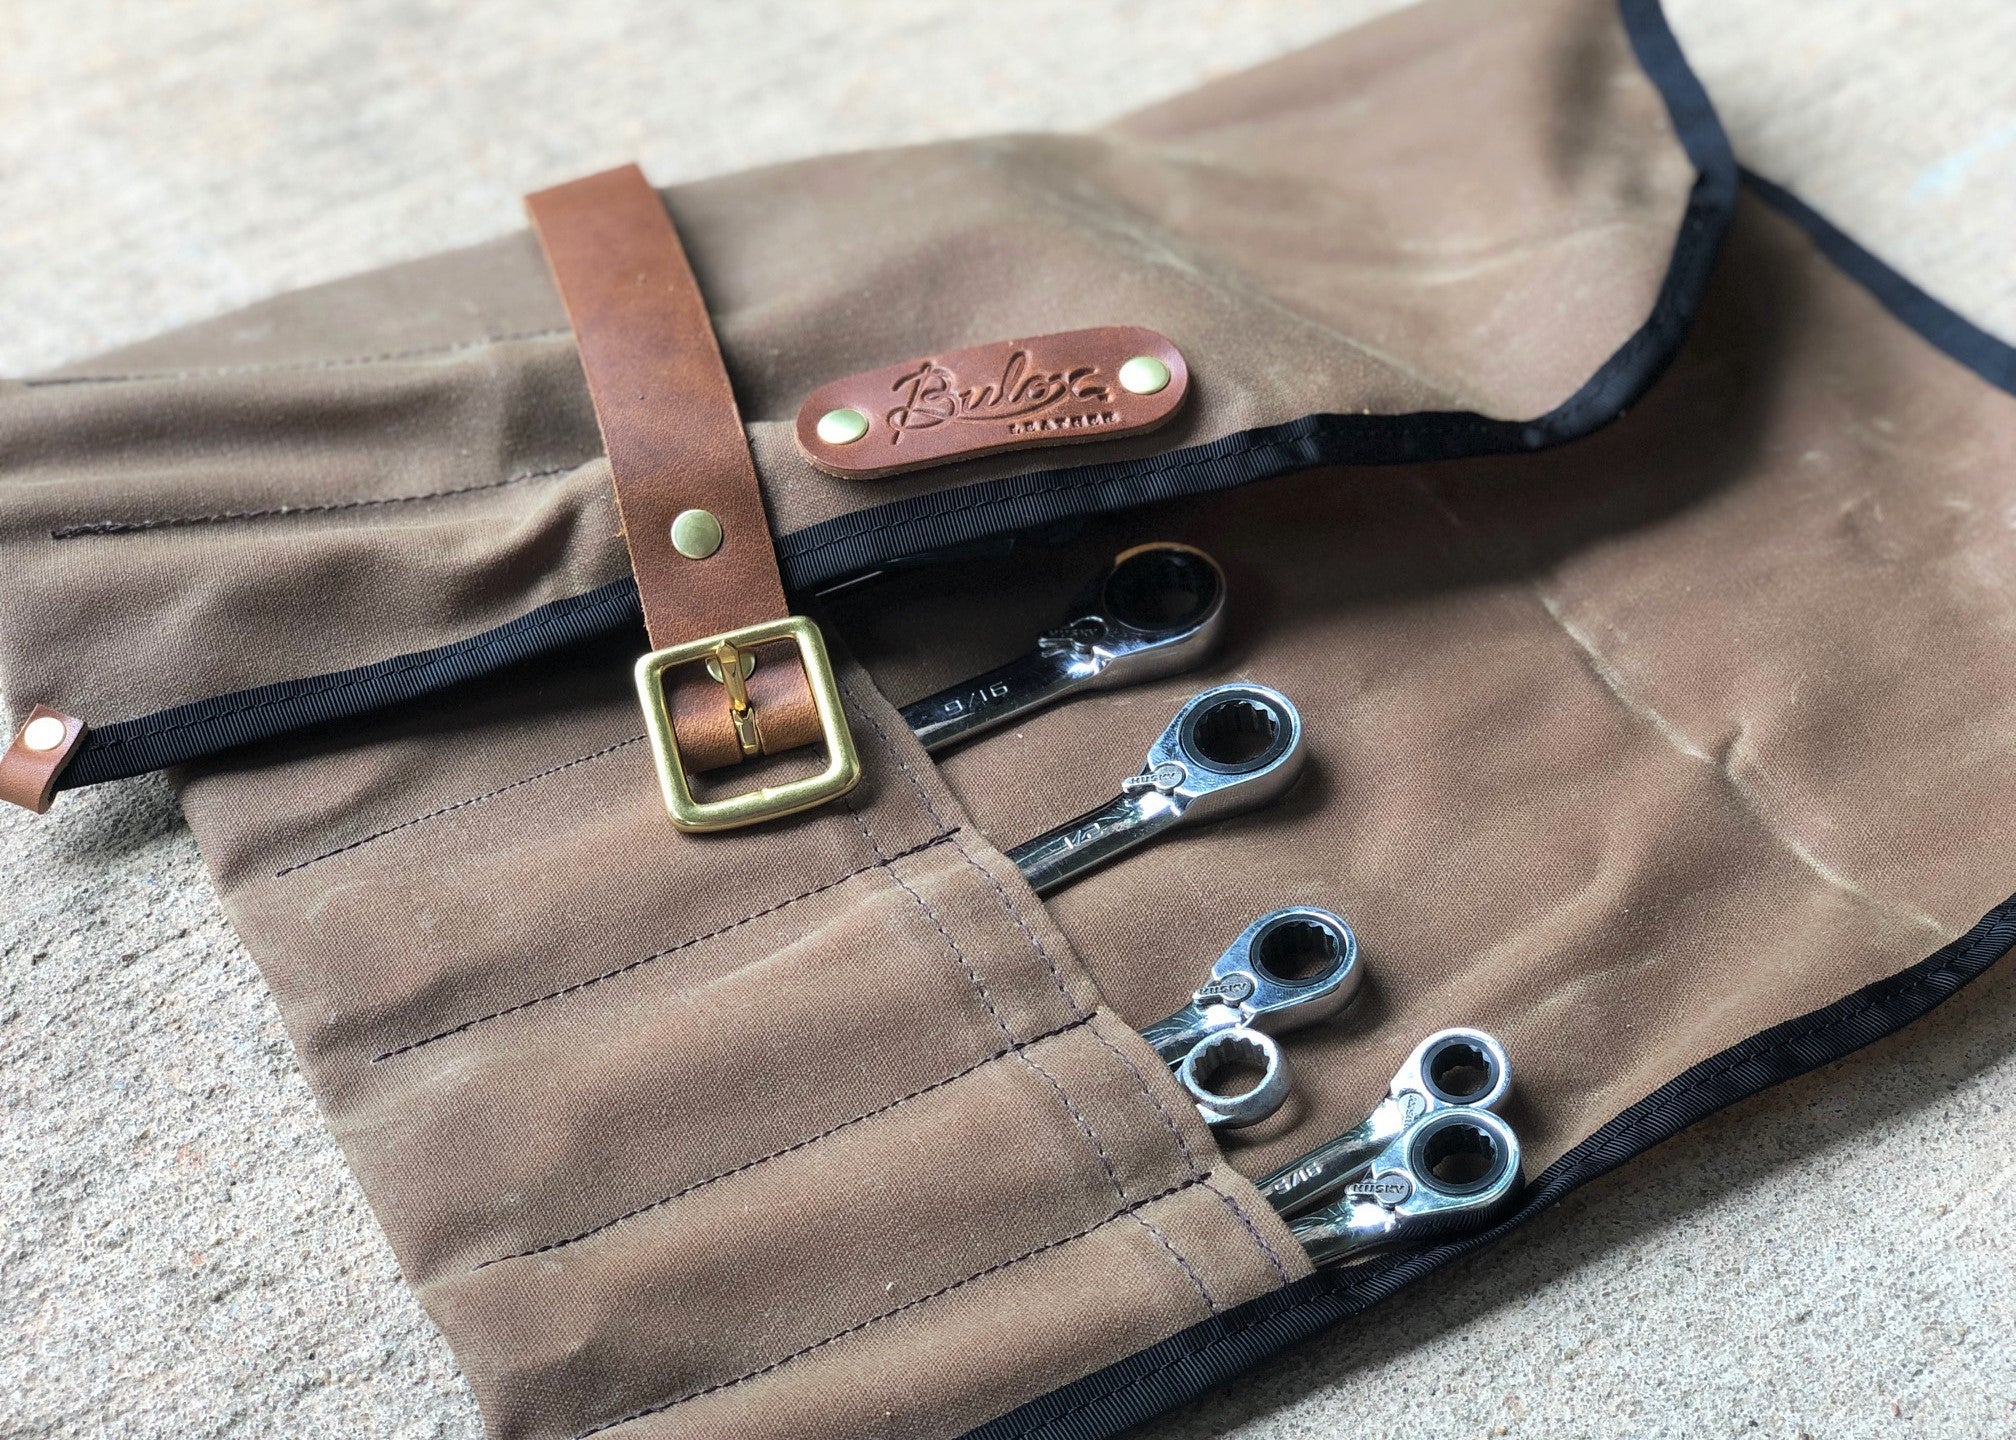 Leather & Canvas Tool Wrap